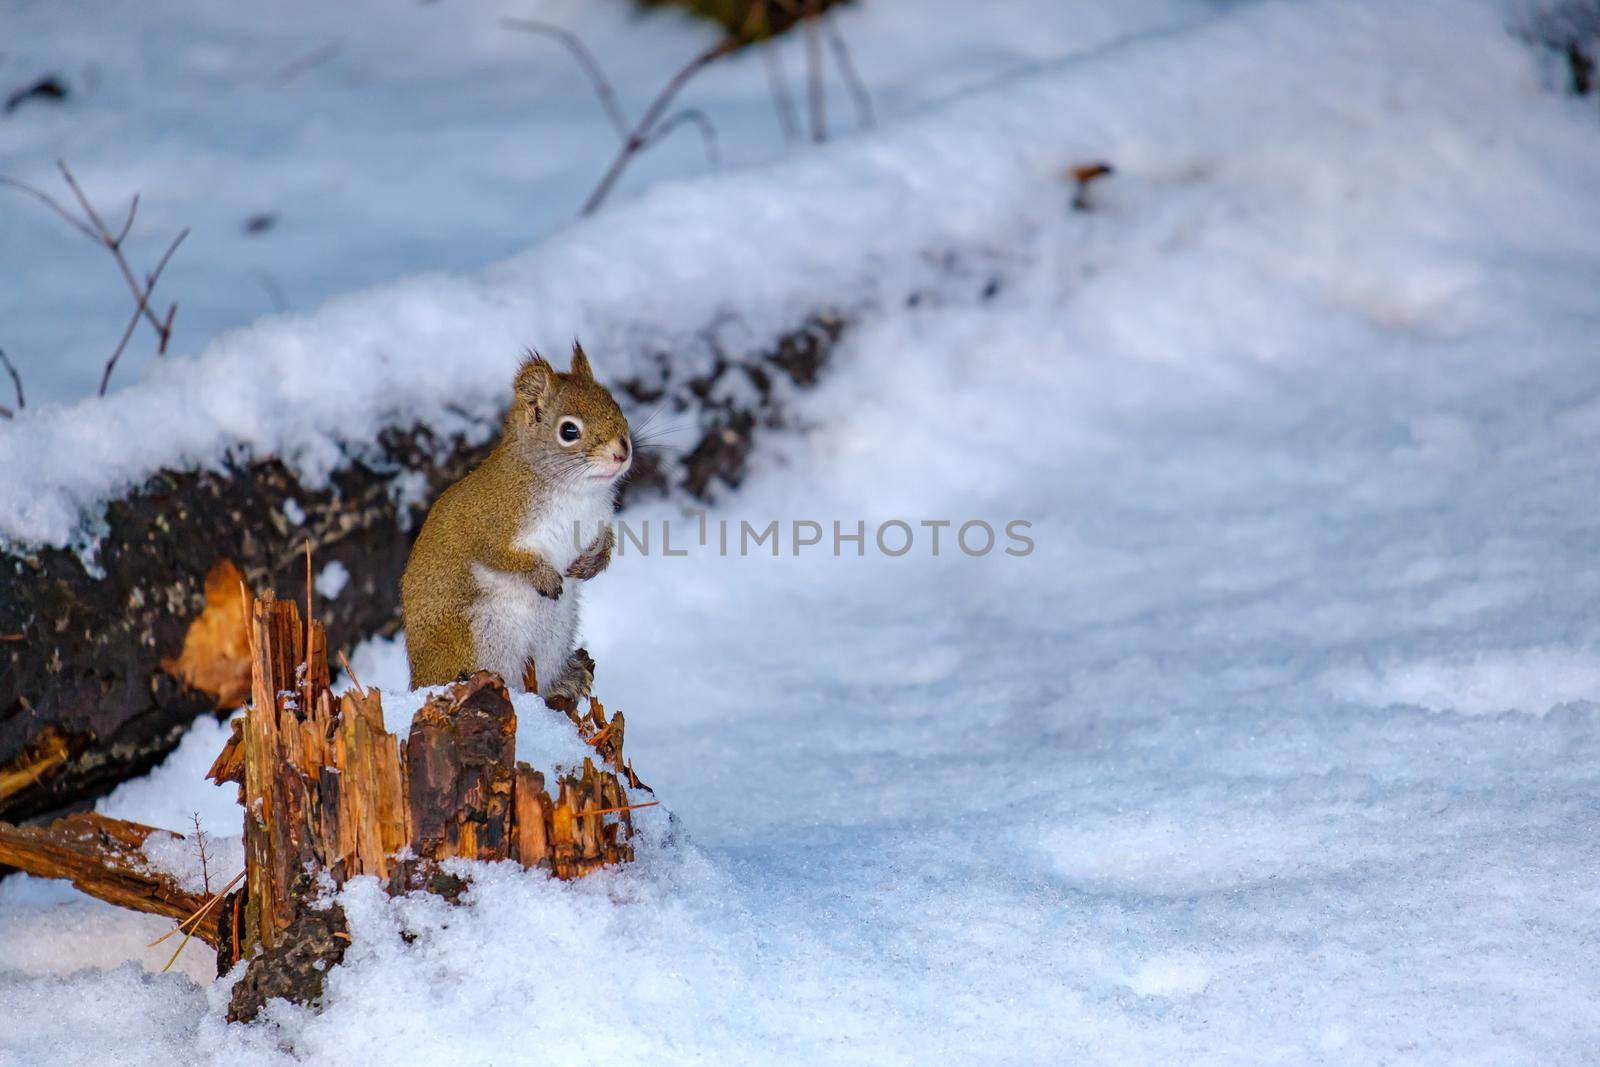 A small American red squirrel is perched upright on a small, broken stump of a fallen tree above fresh surrounding snow.